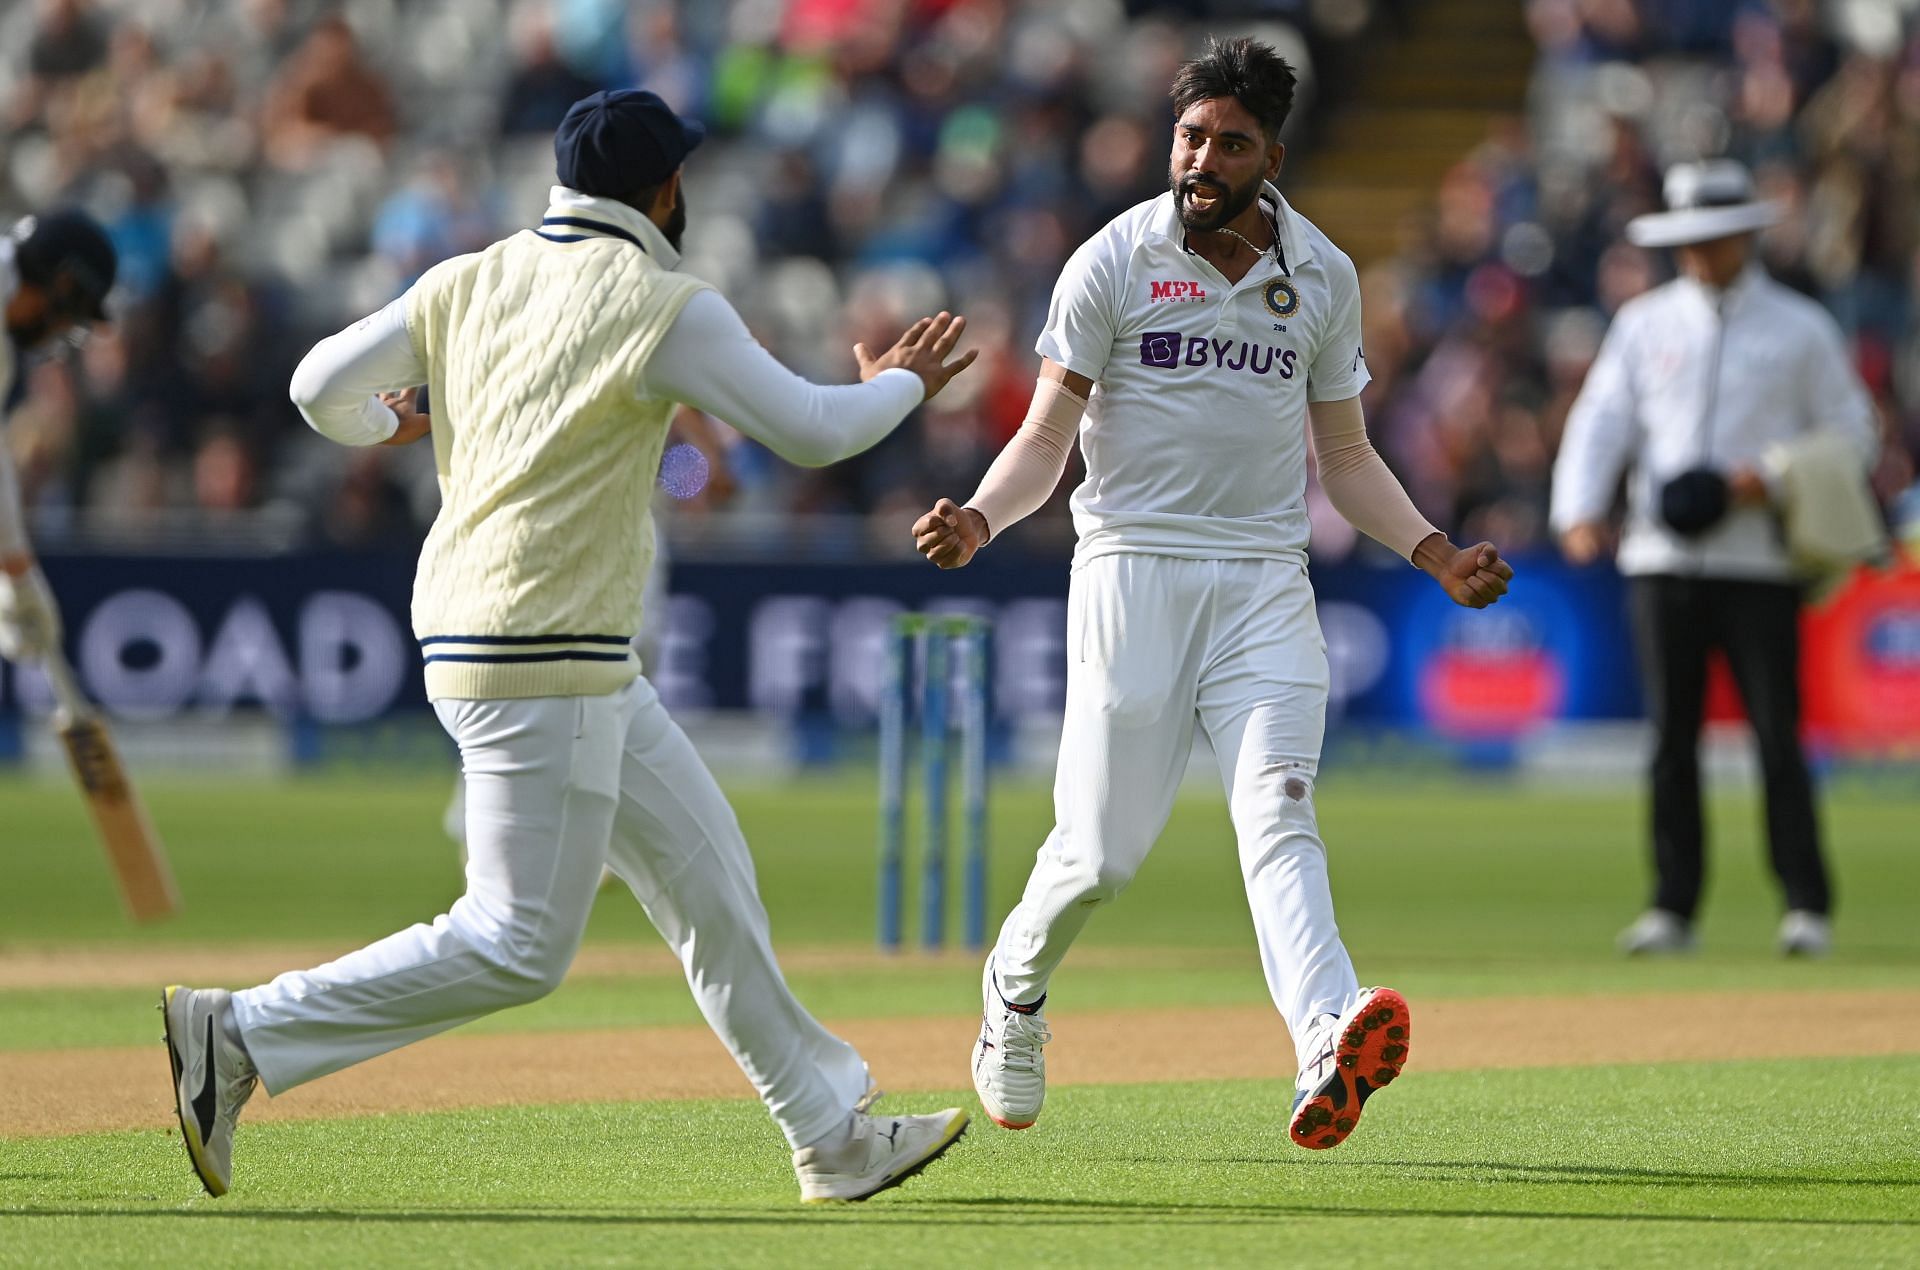 England v India - Fifth LV= Insurance Test Match: Day Two